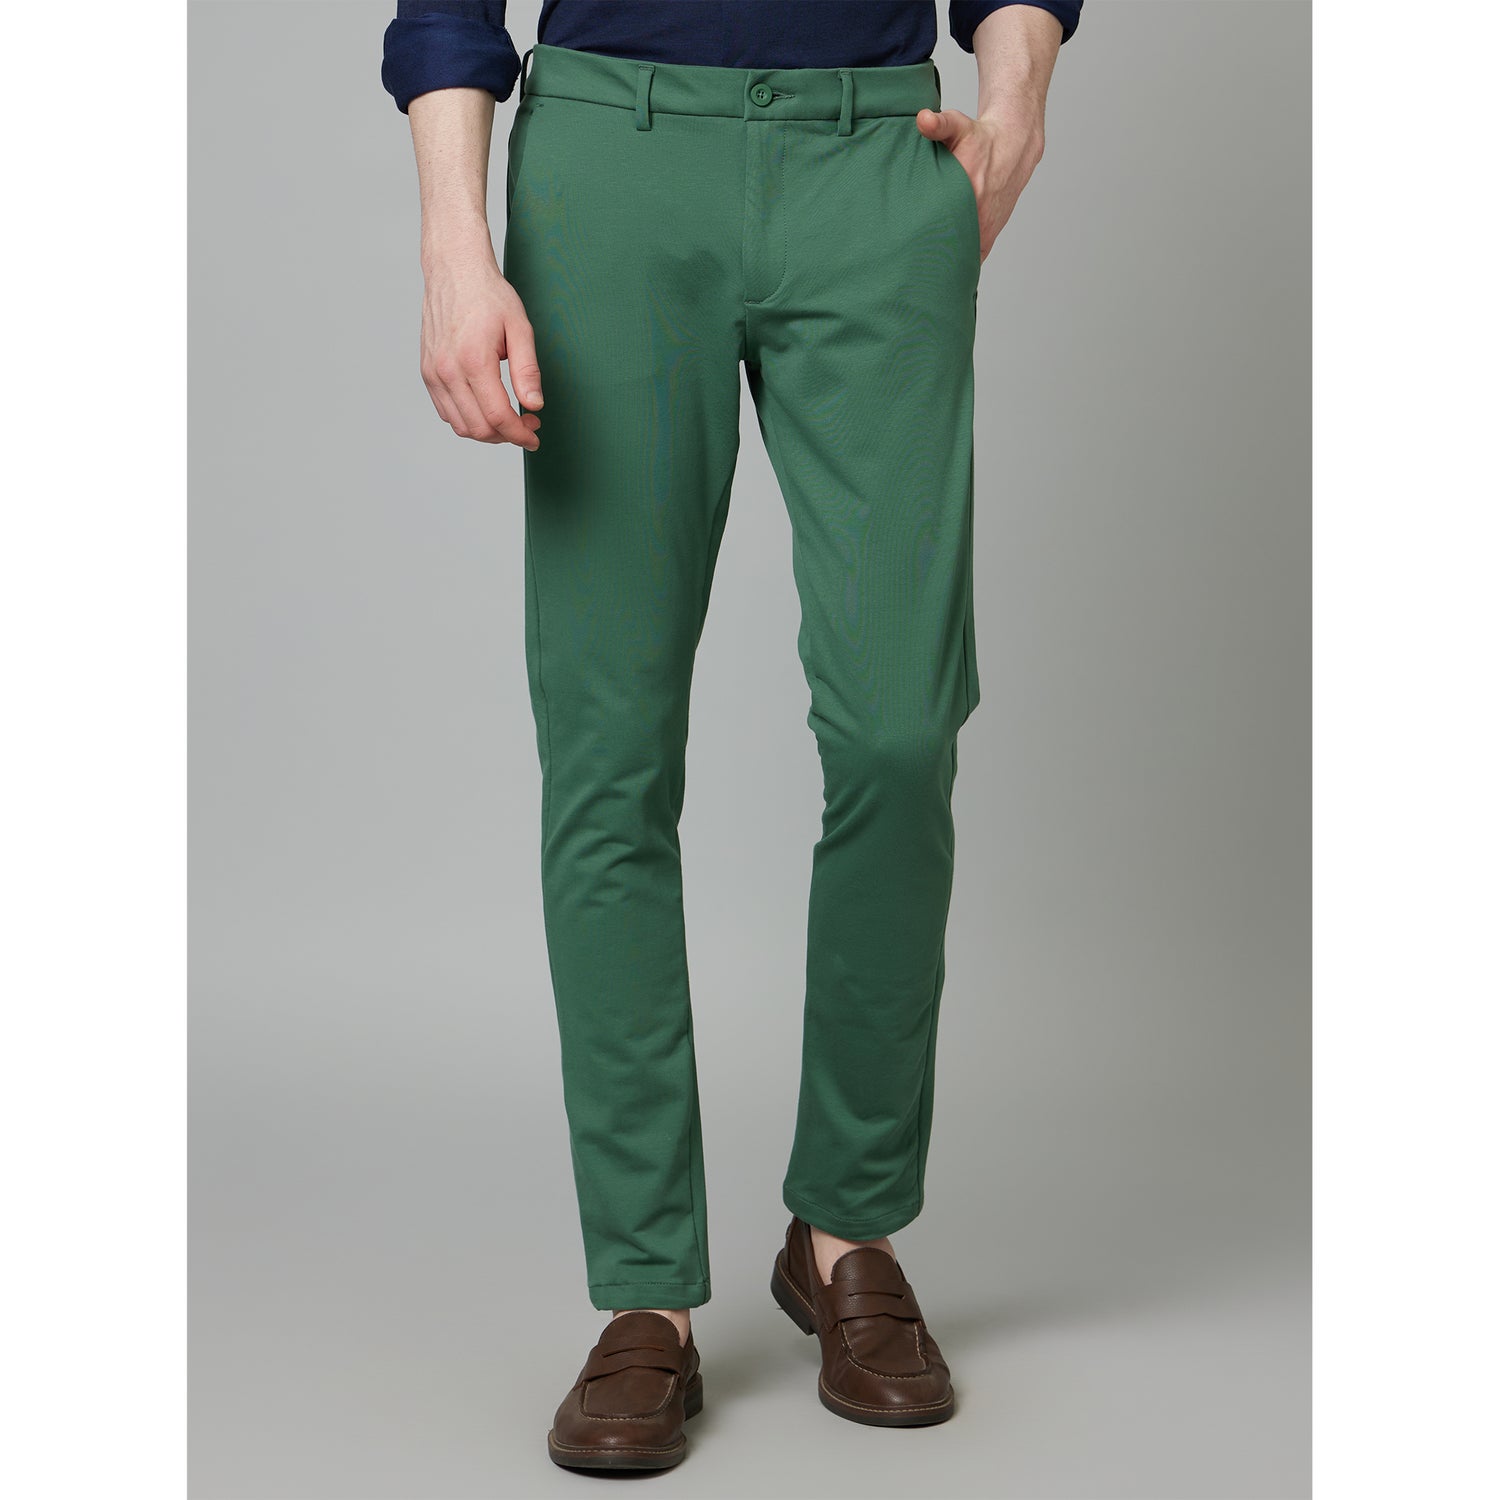 Green Mid Rise Plain Cotton Slim Fit Chinos Trousers (COKNITNEW)